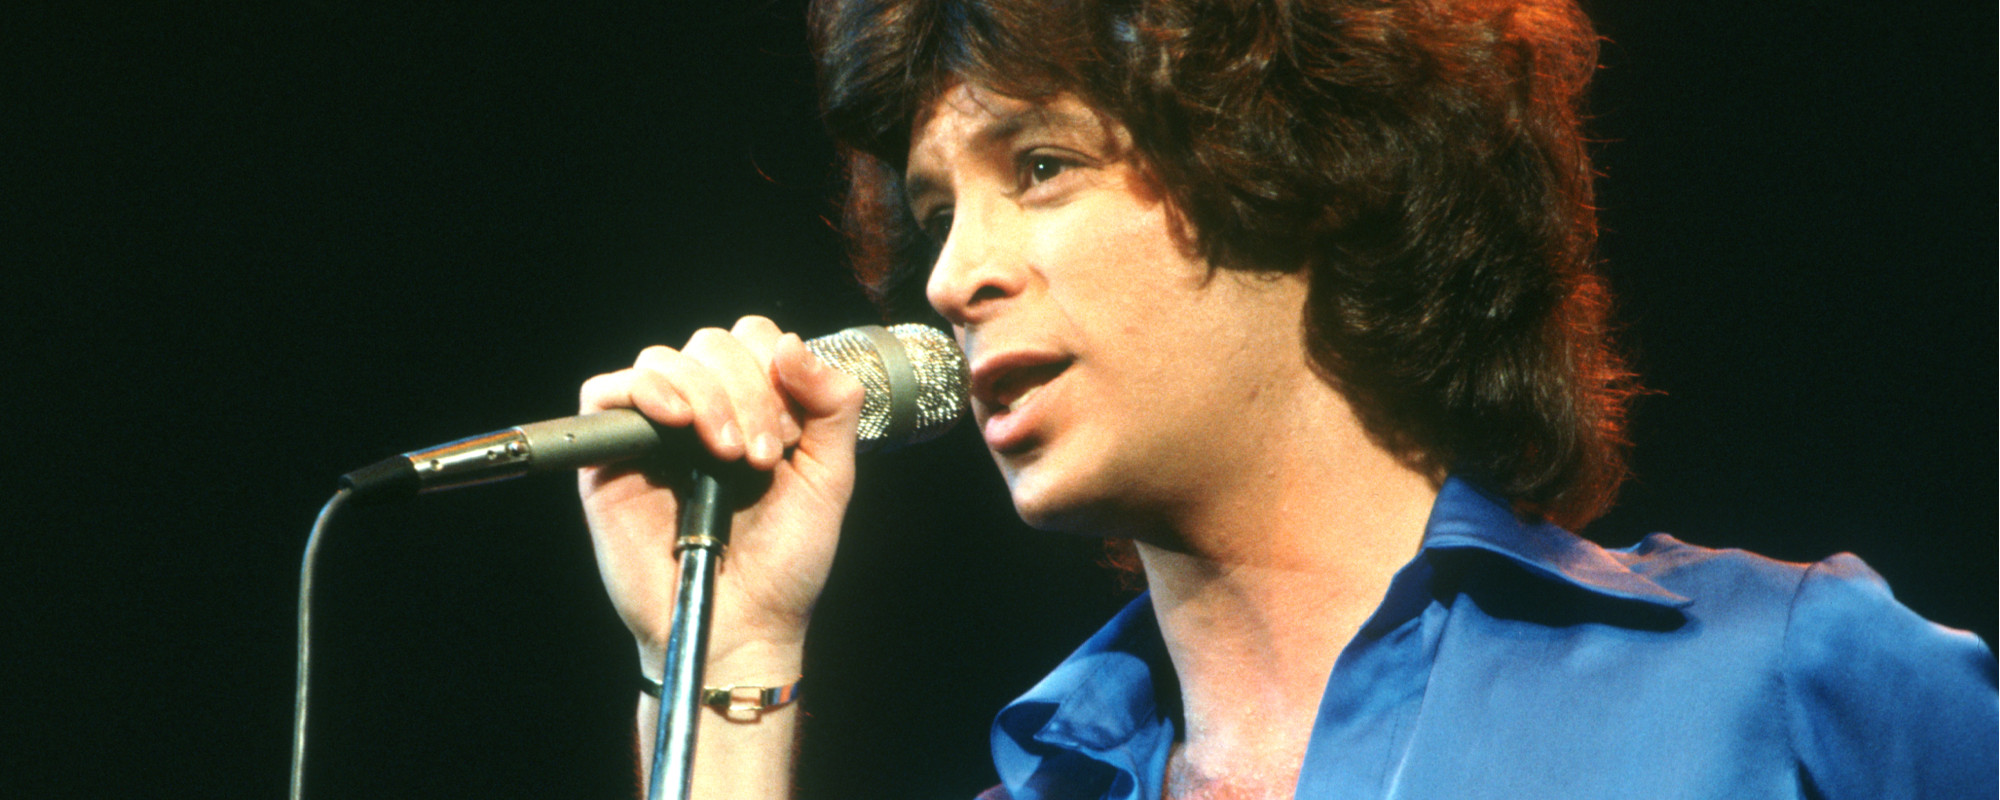 Paul Stanley and More Pay Tribute to Late Eric Carmen